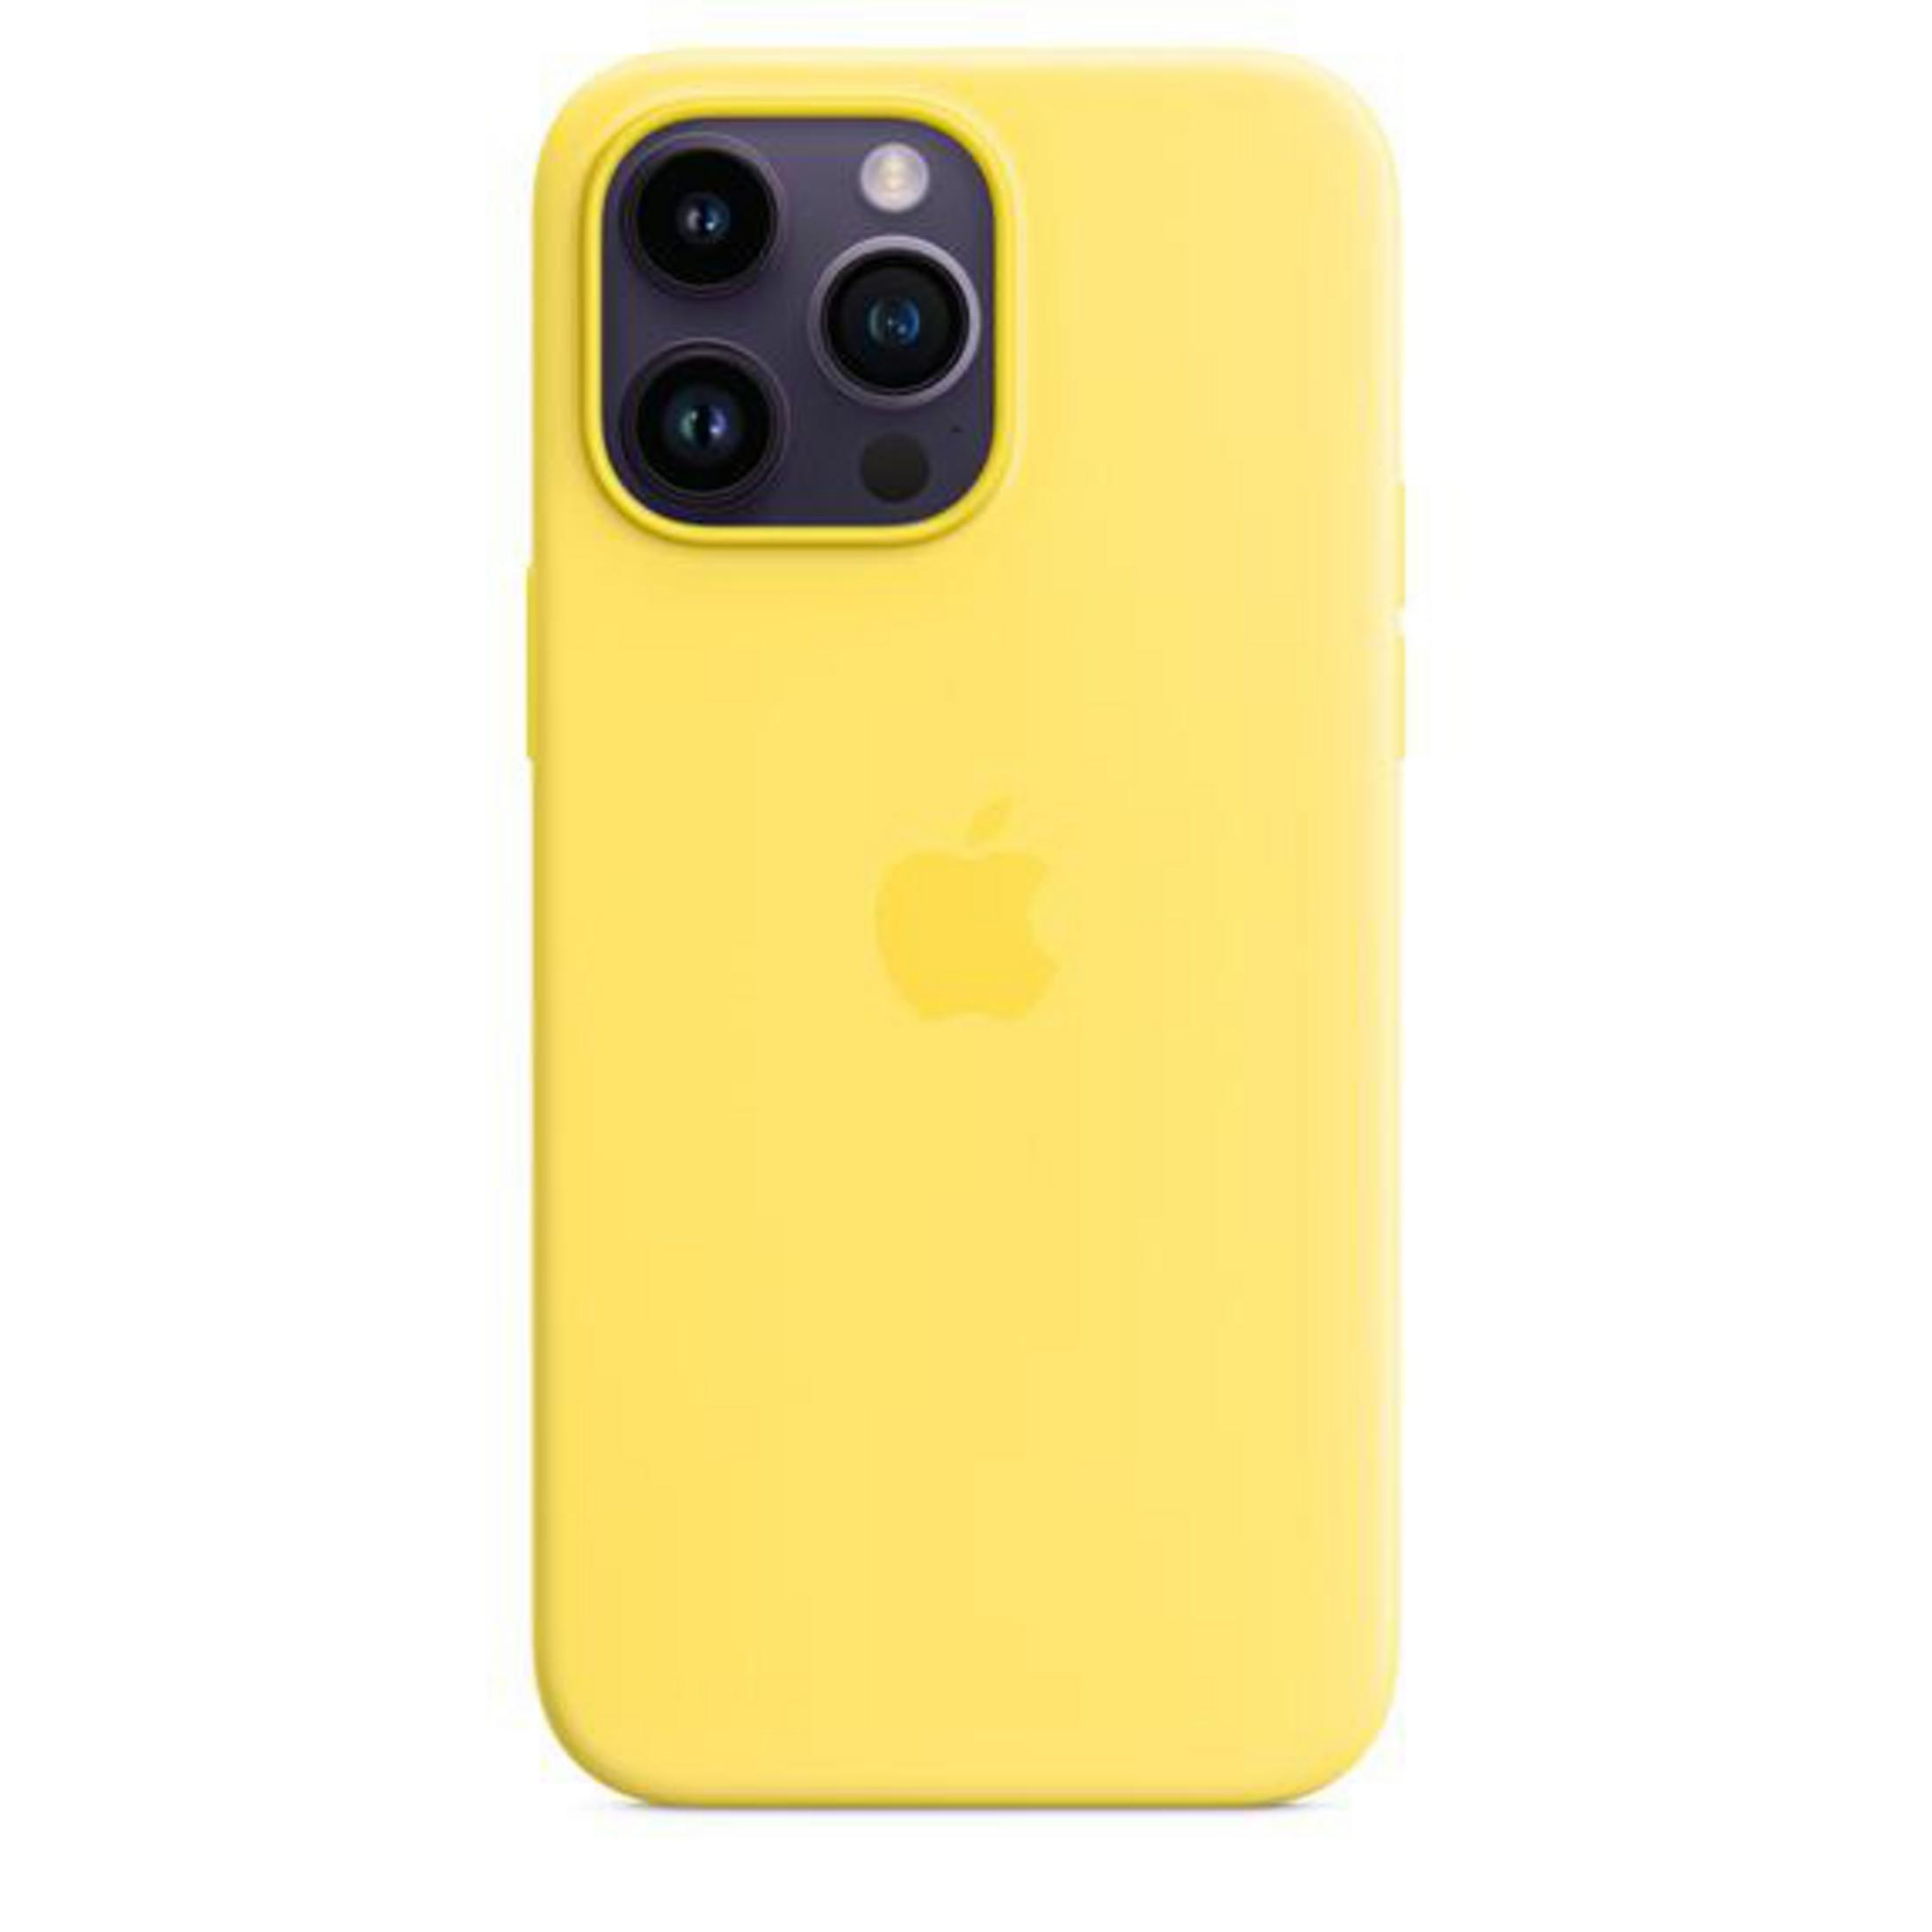 CAYLW, MQUL3ZM/A 14 APPLE Max, Backcover, Kanariengelb SIL MS iPhone IP14PROMAX Pro Apple, CASE